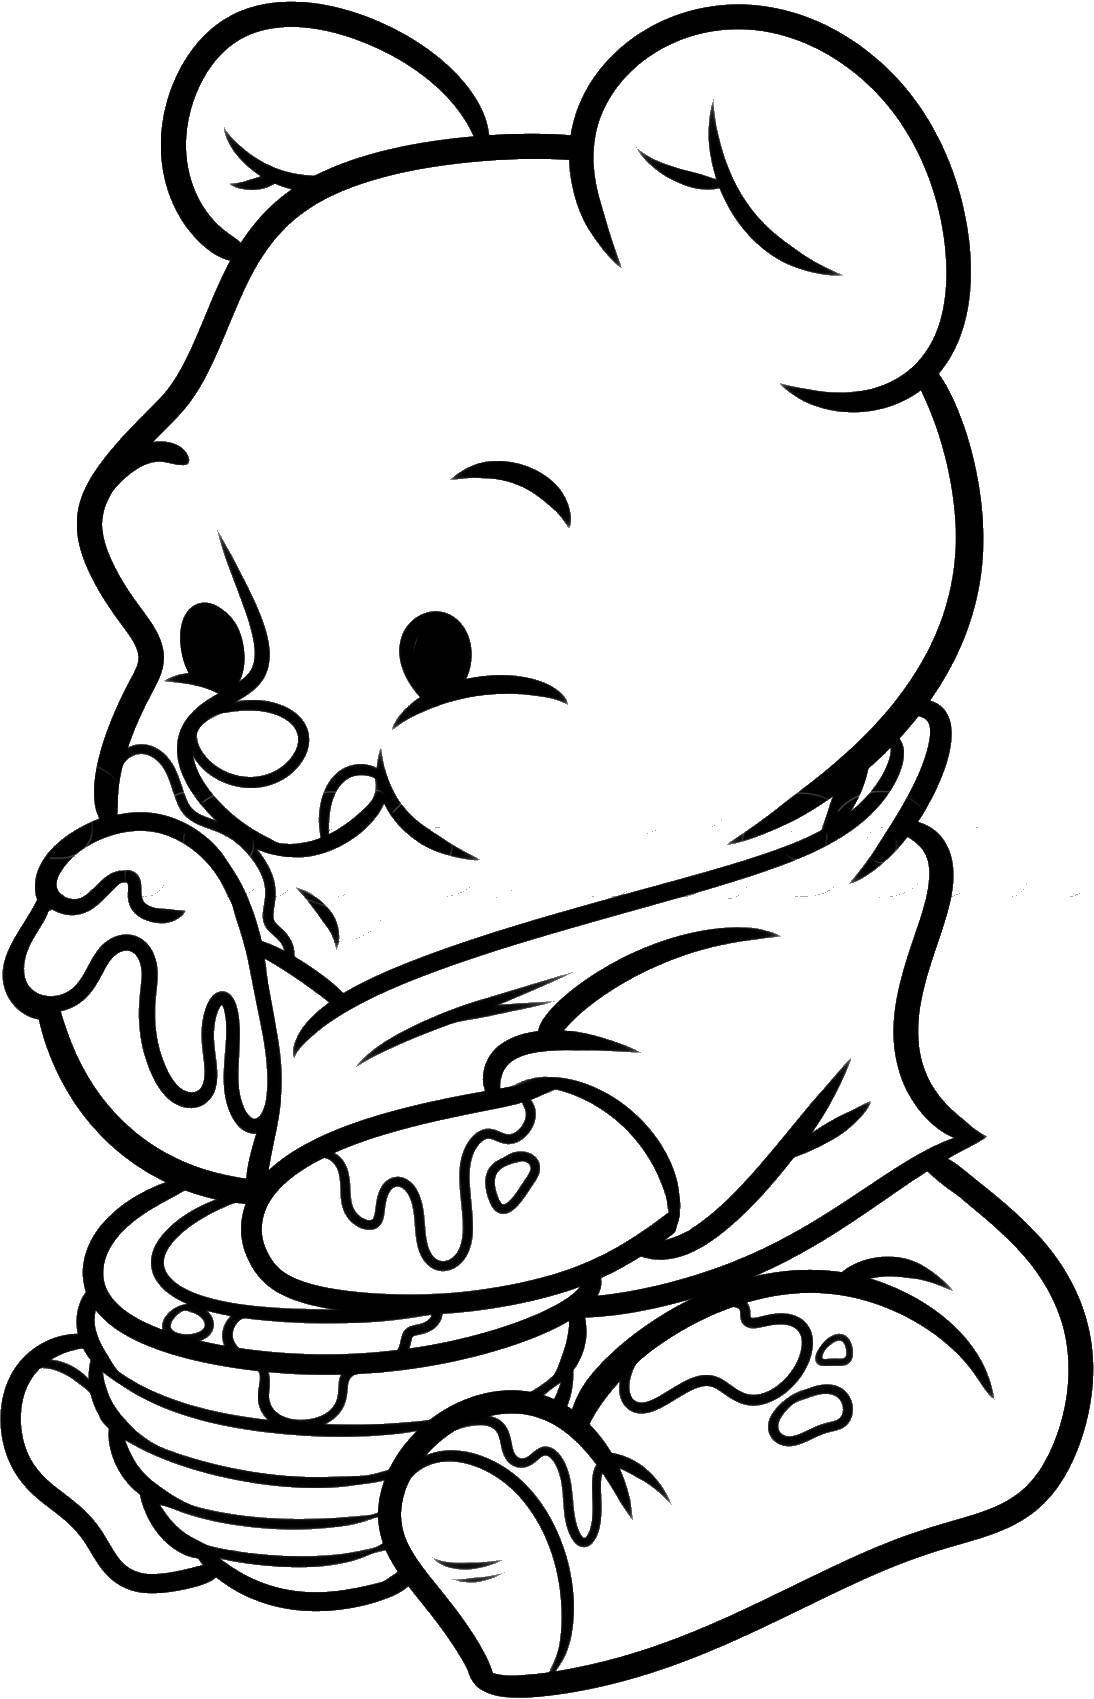 Coloring Little Winnie. Category Winnie the Pooh. Tags:  Winnie the Pooh, bear, cartoons.